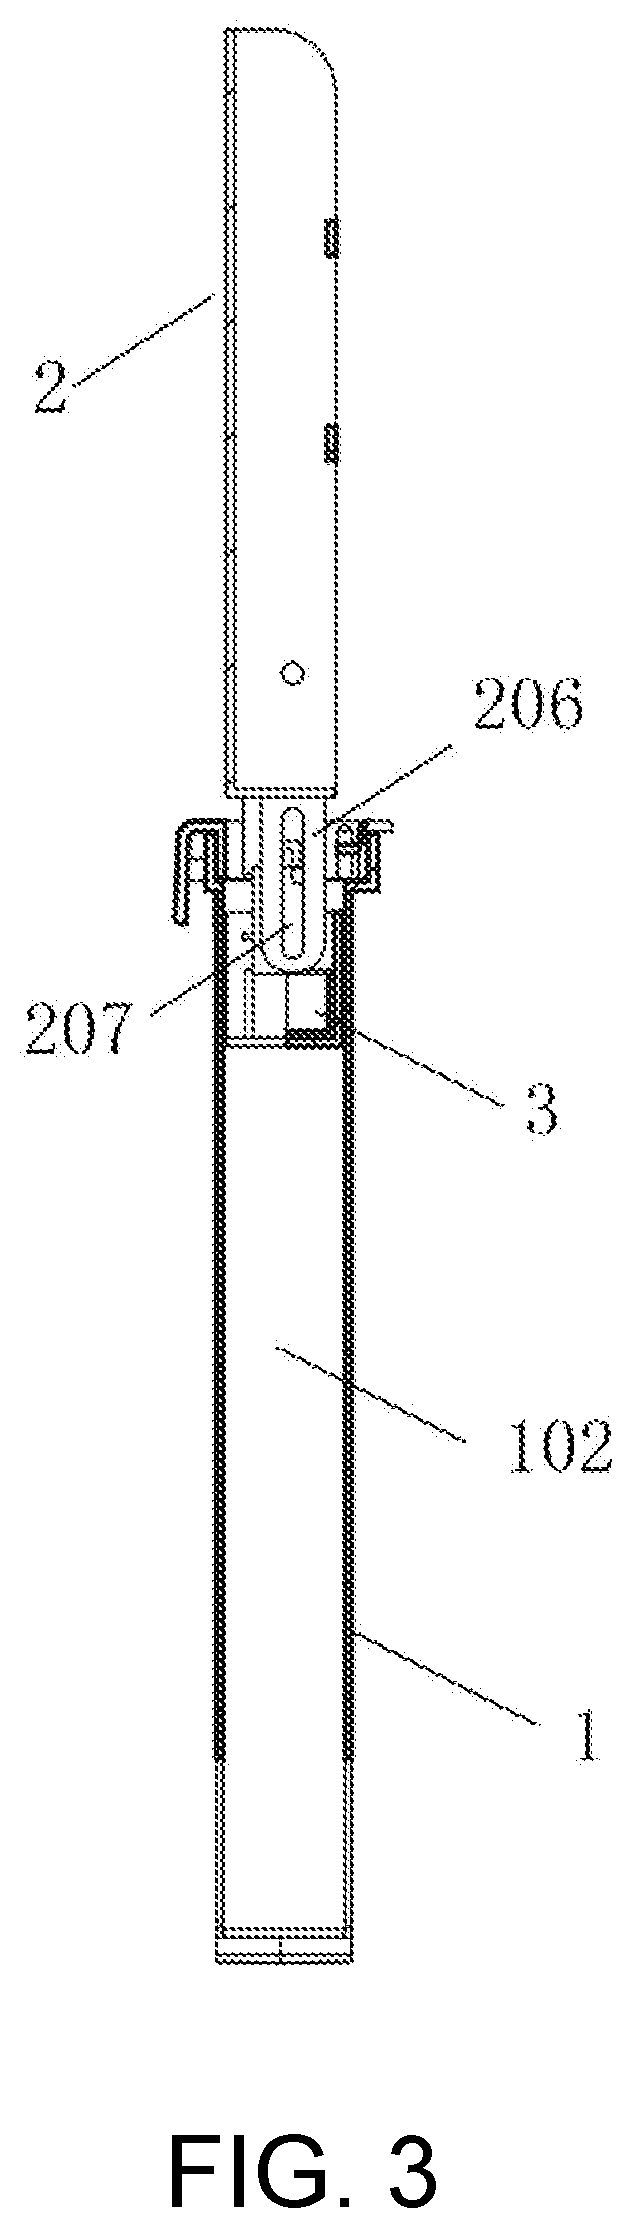 Storage device for portable device used in luggage